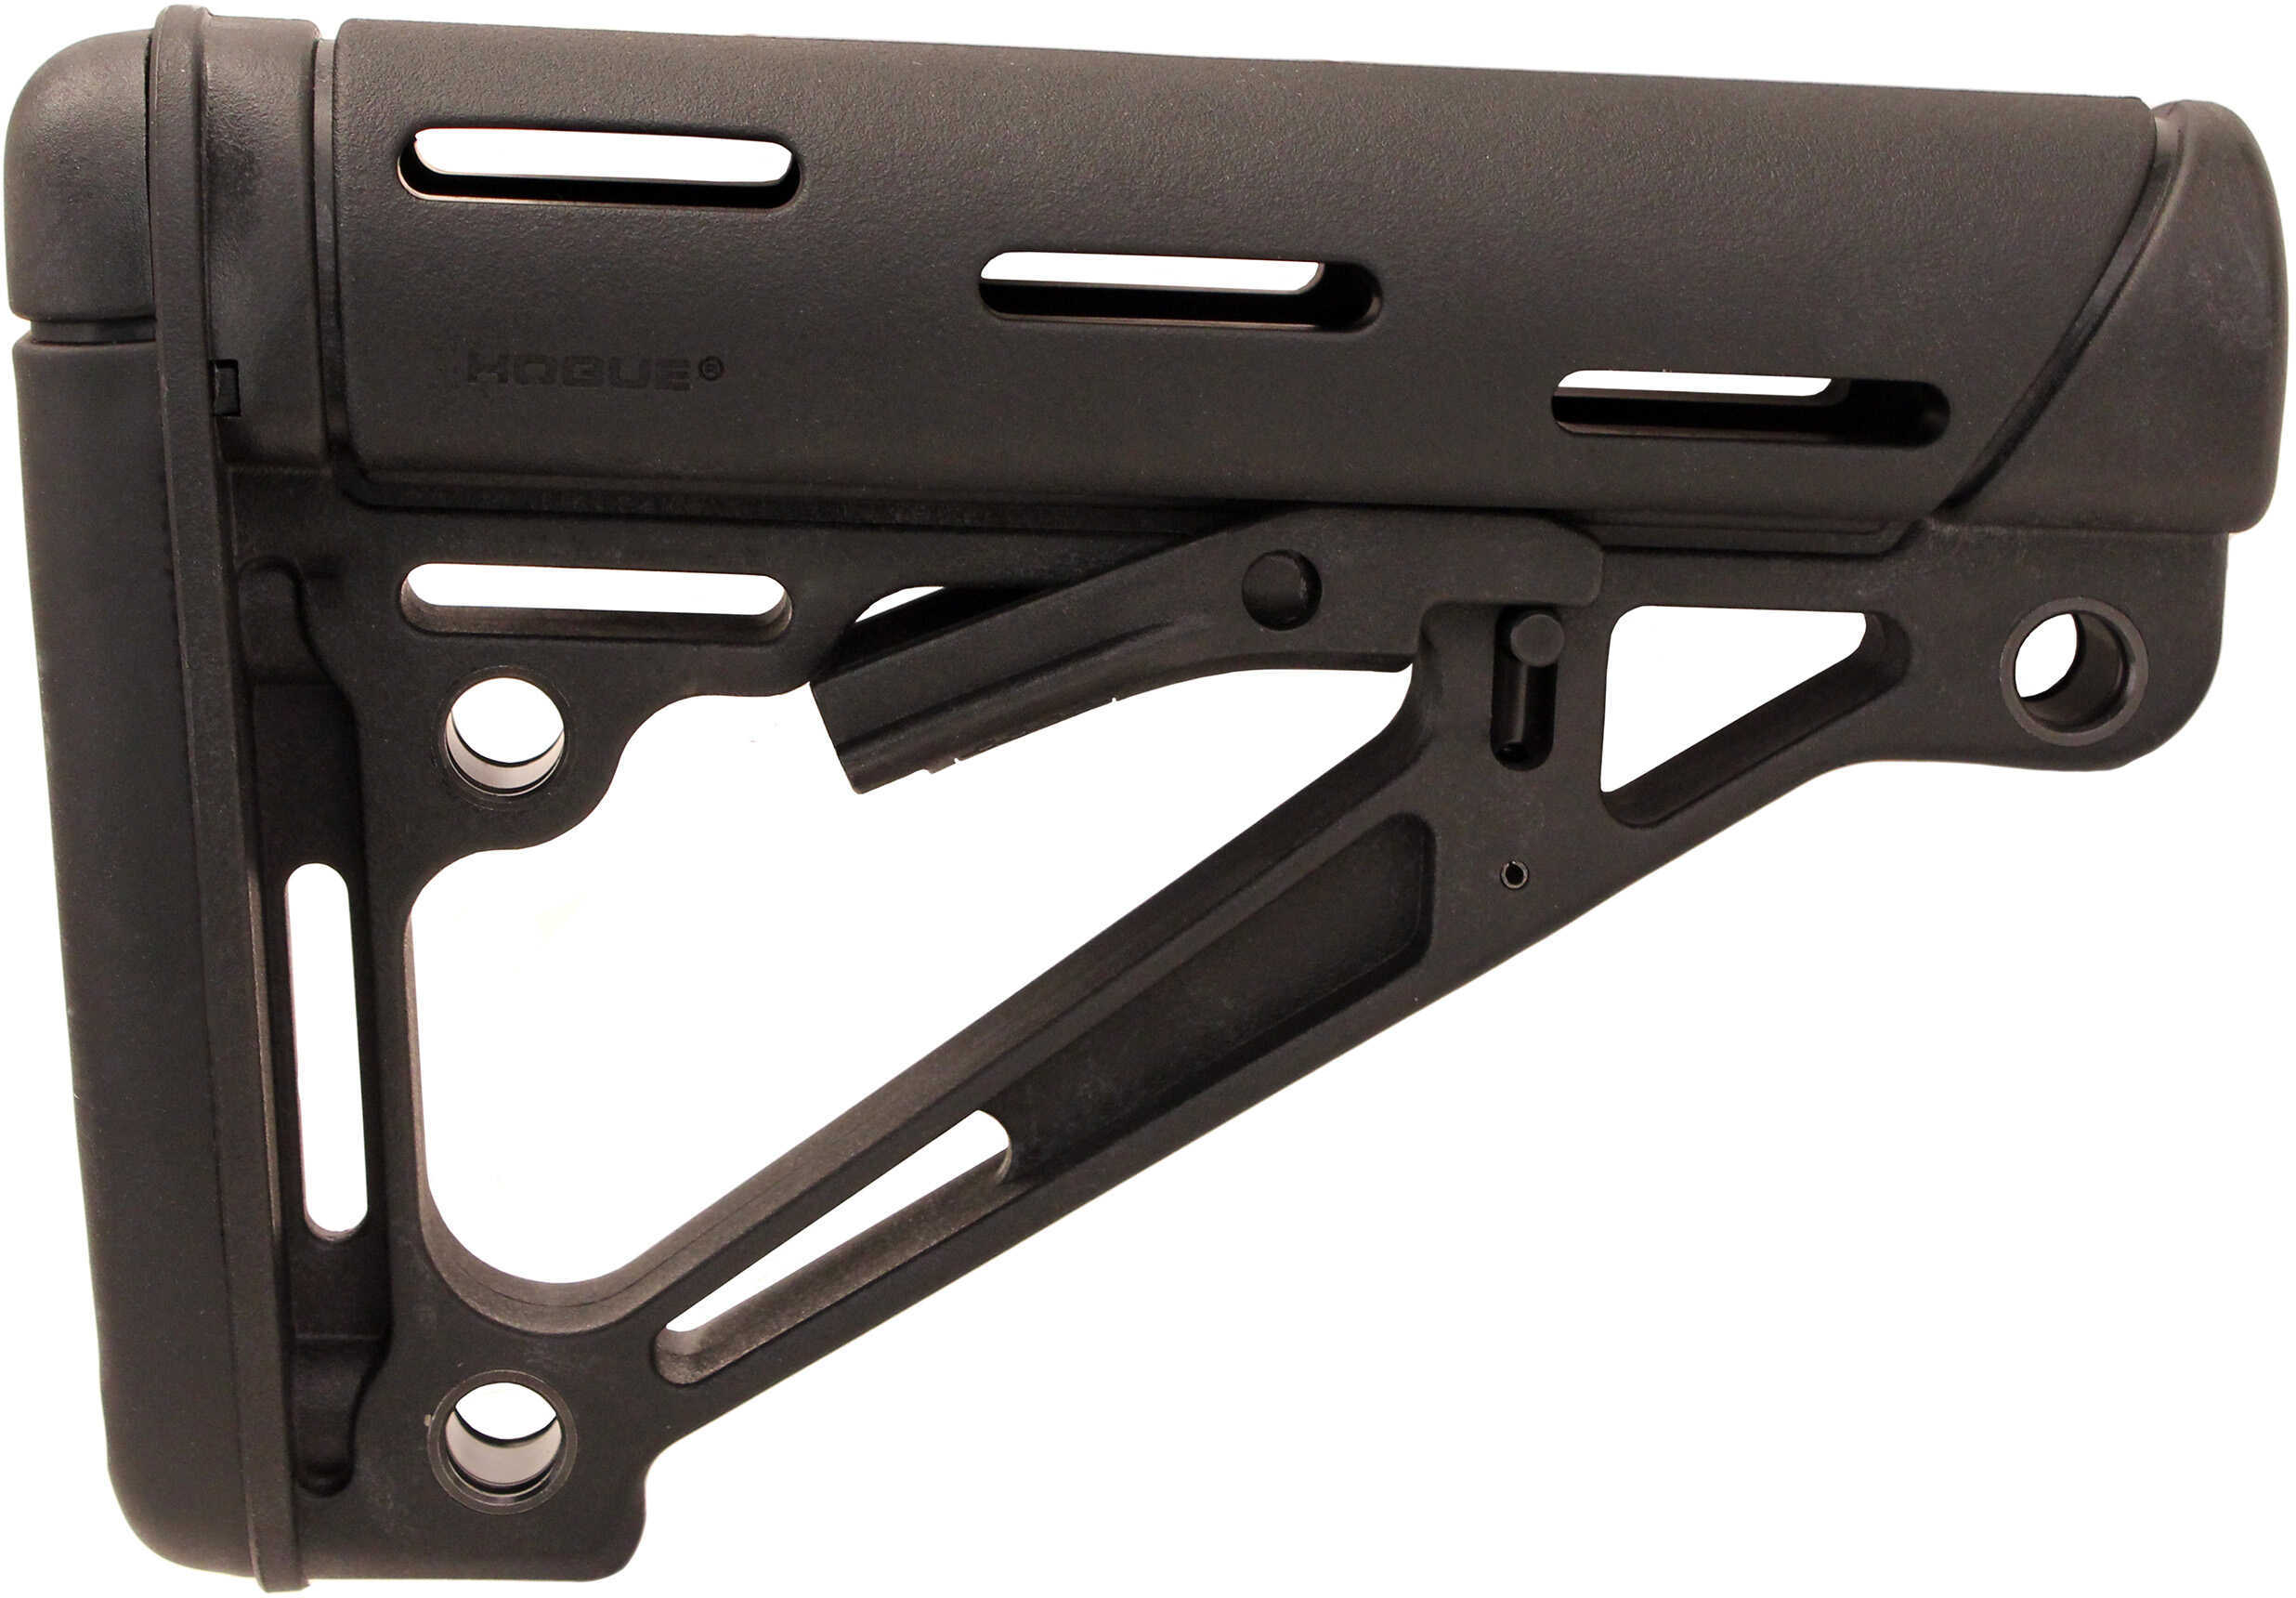 Hogue Grips AR-15 6-Position Stock Fits Mil-Spec Buffer Tube Only Black Finish 15040